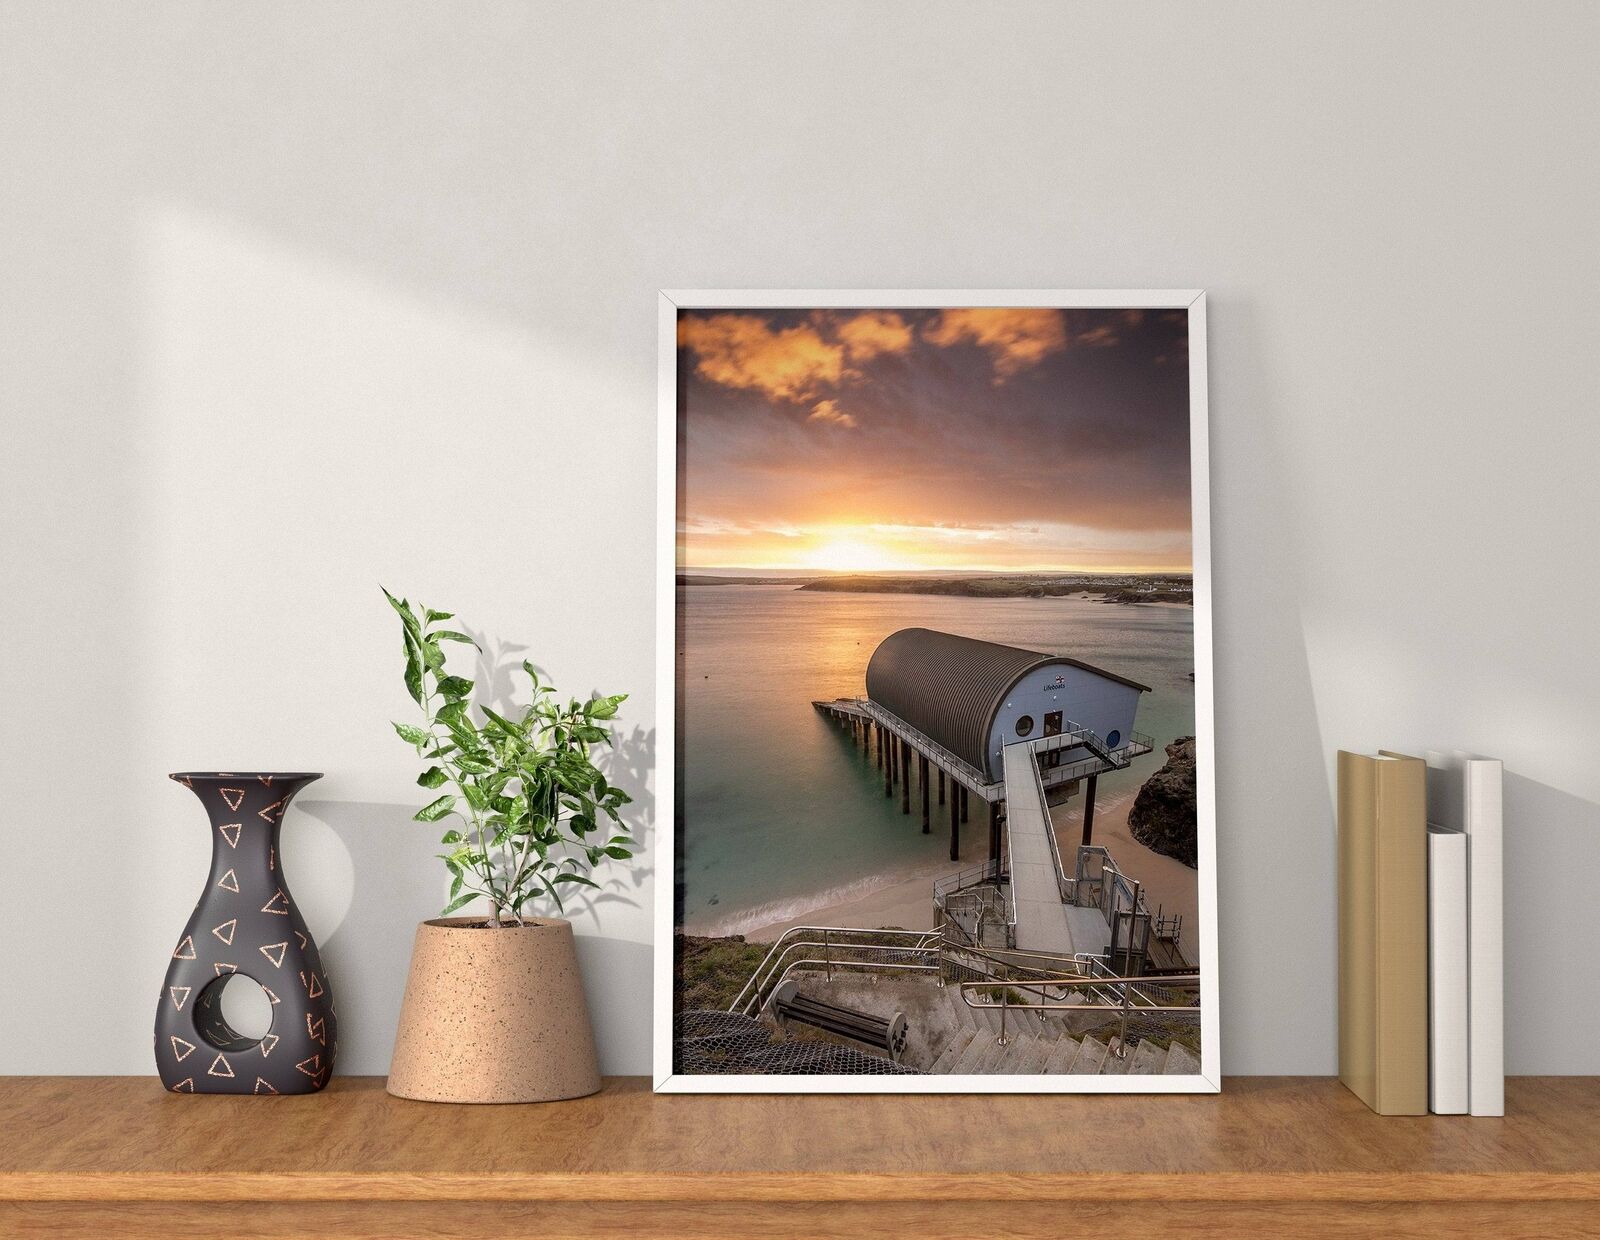 RNLI Shop | Wall Art of Padstow Lifeboat Station, Cornwall Prints for Sale Home 